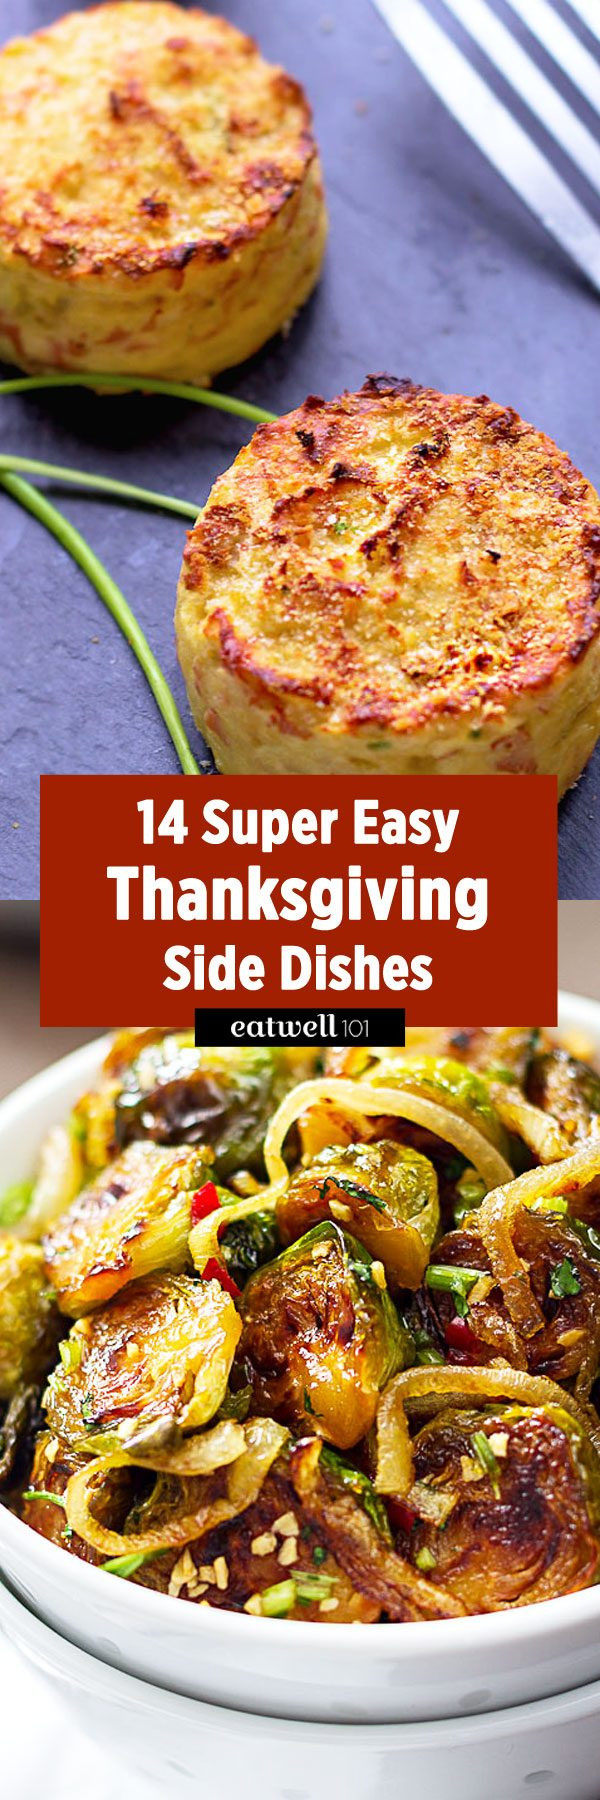 Traditional Thanksgiving Side Dishes
 Up Your Thanksgiving With These Super Easy Side Dishes